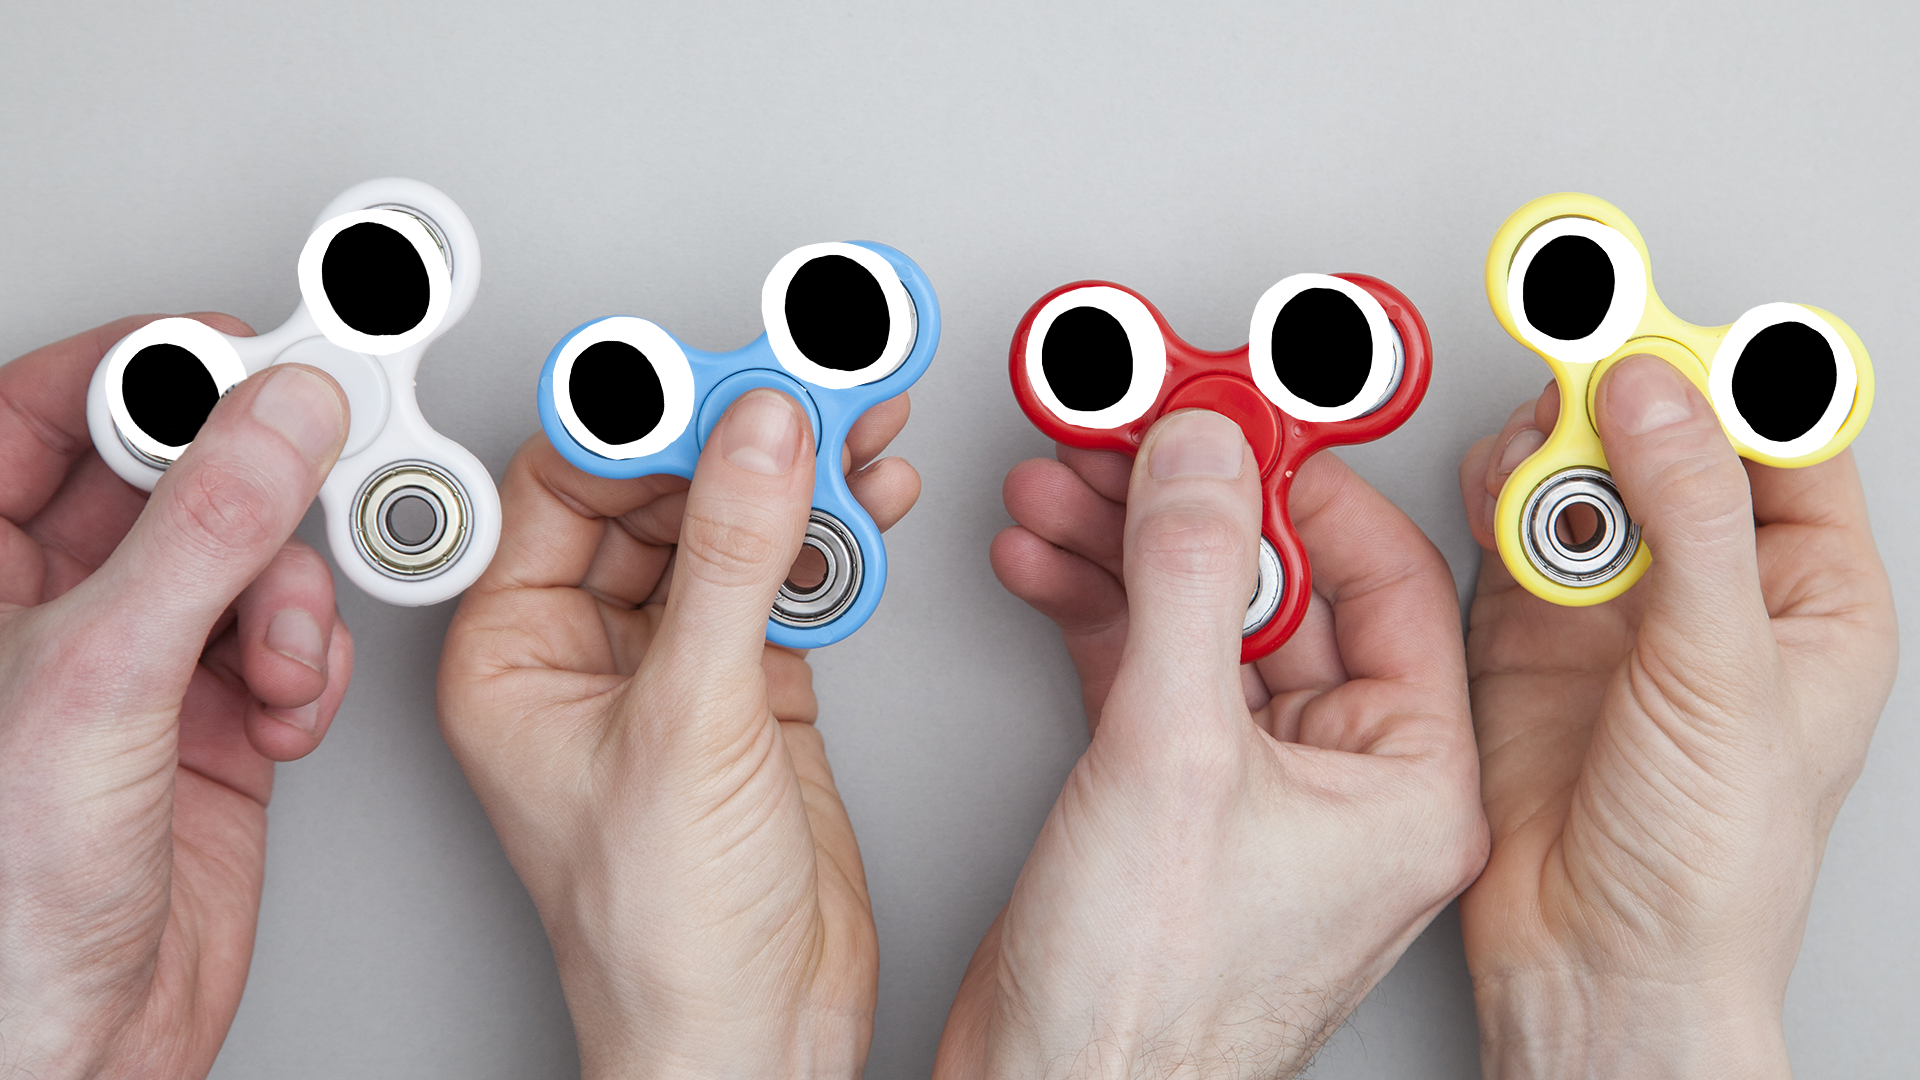 Fidget spinners with eyes